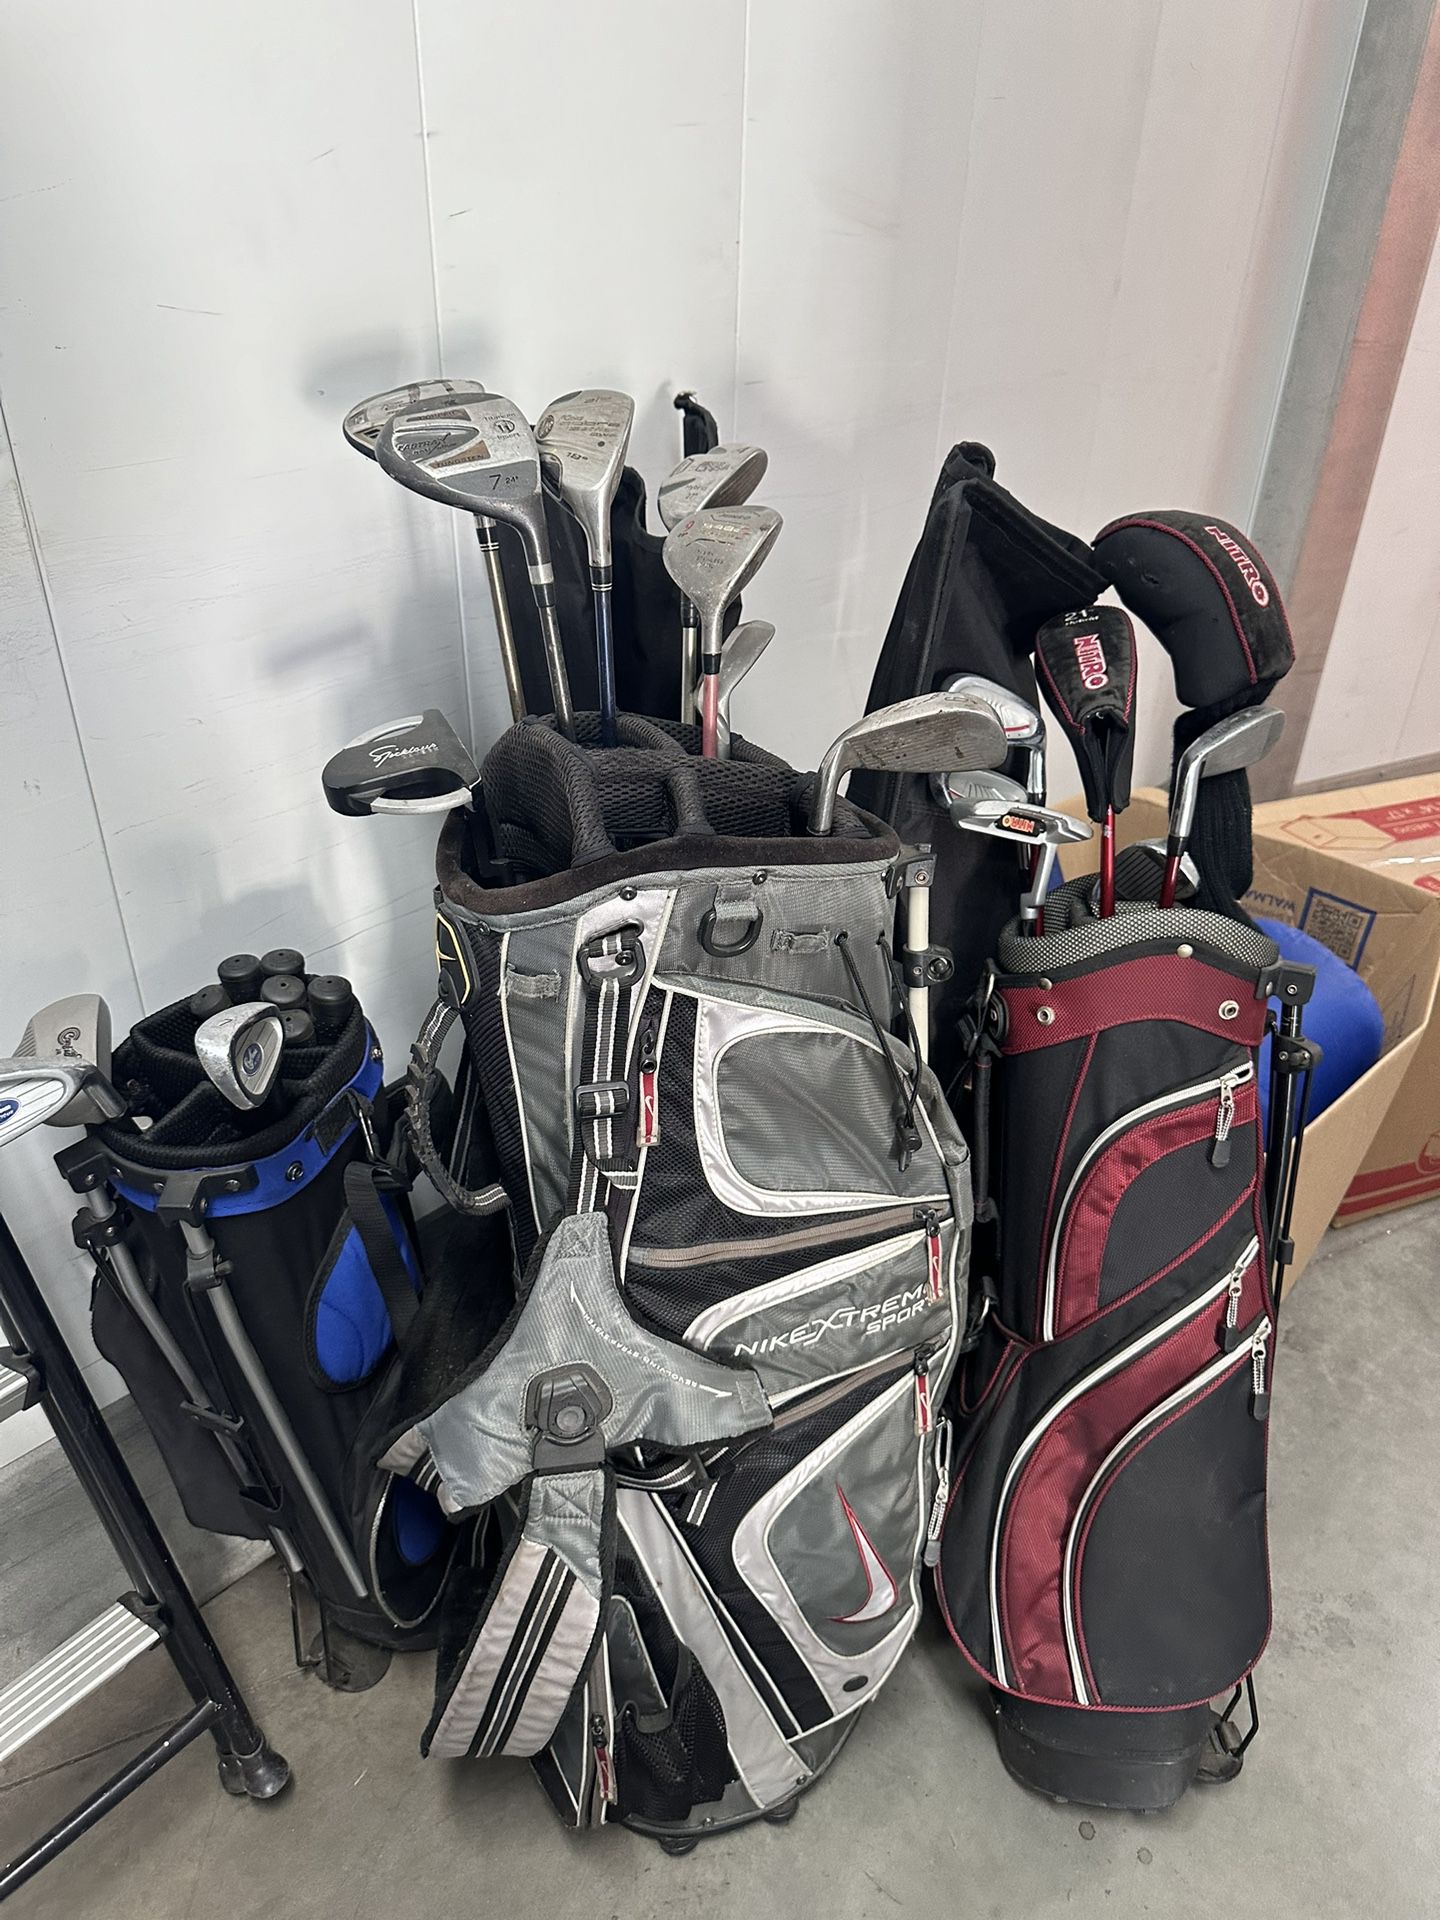 Golf Bags And Clubs 